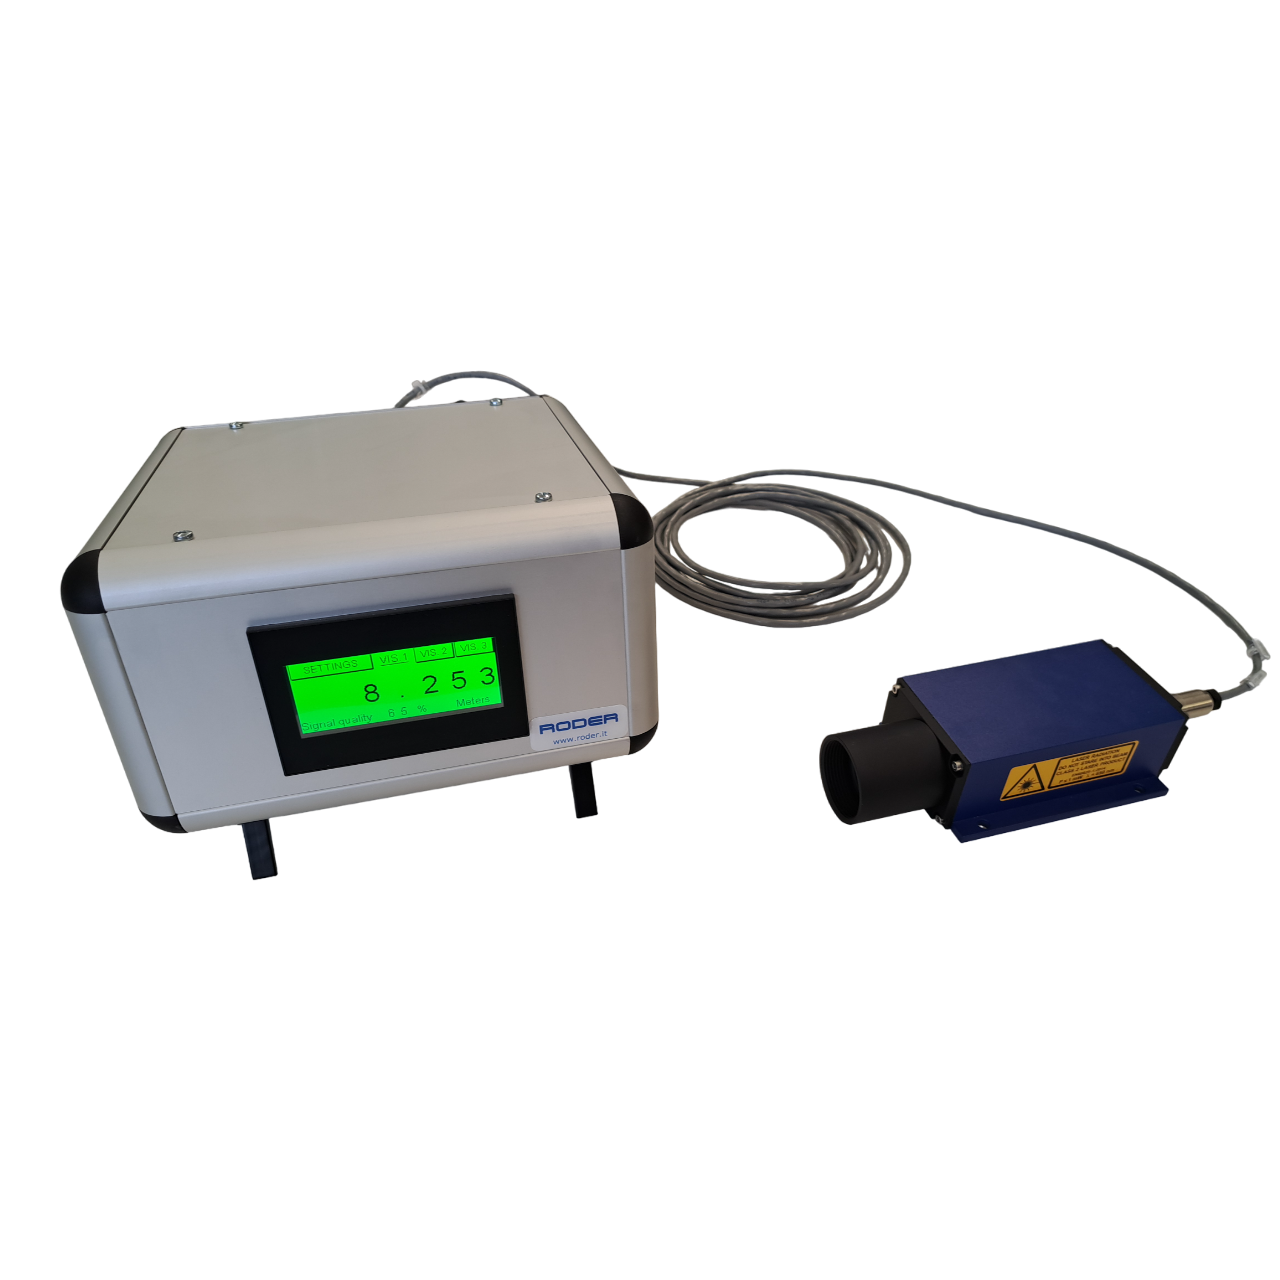 Application kit for laser distance meters for measuring distance, displacement and deformation